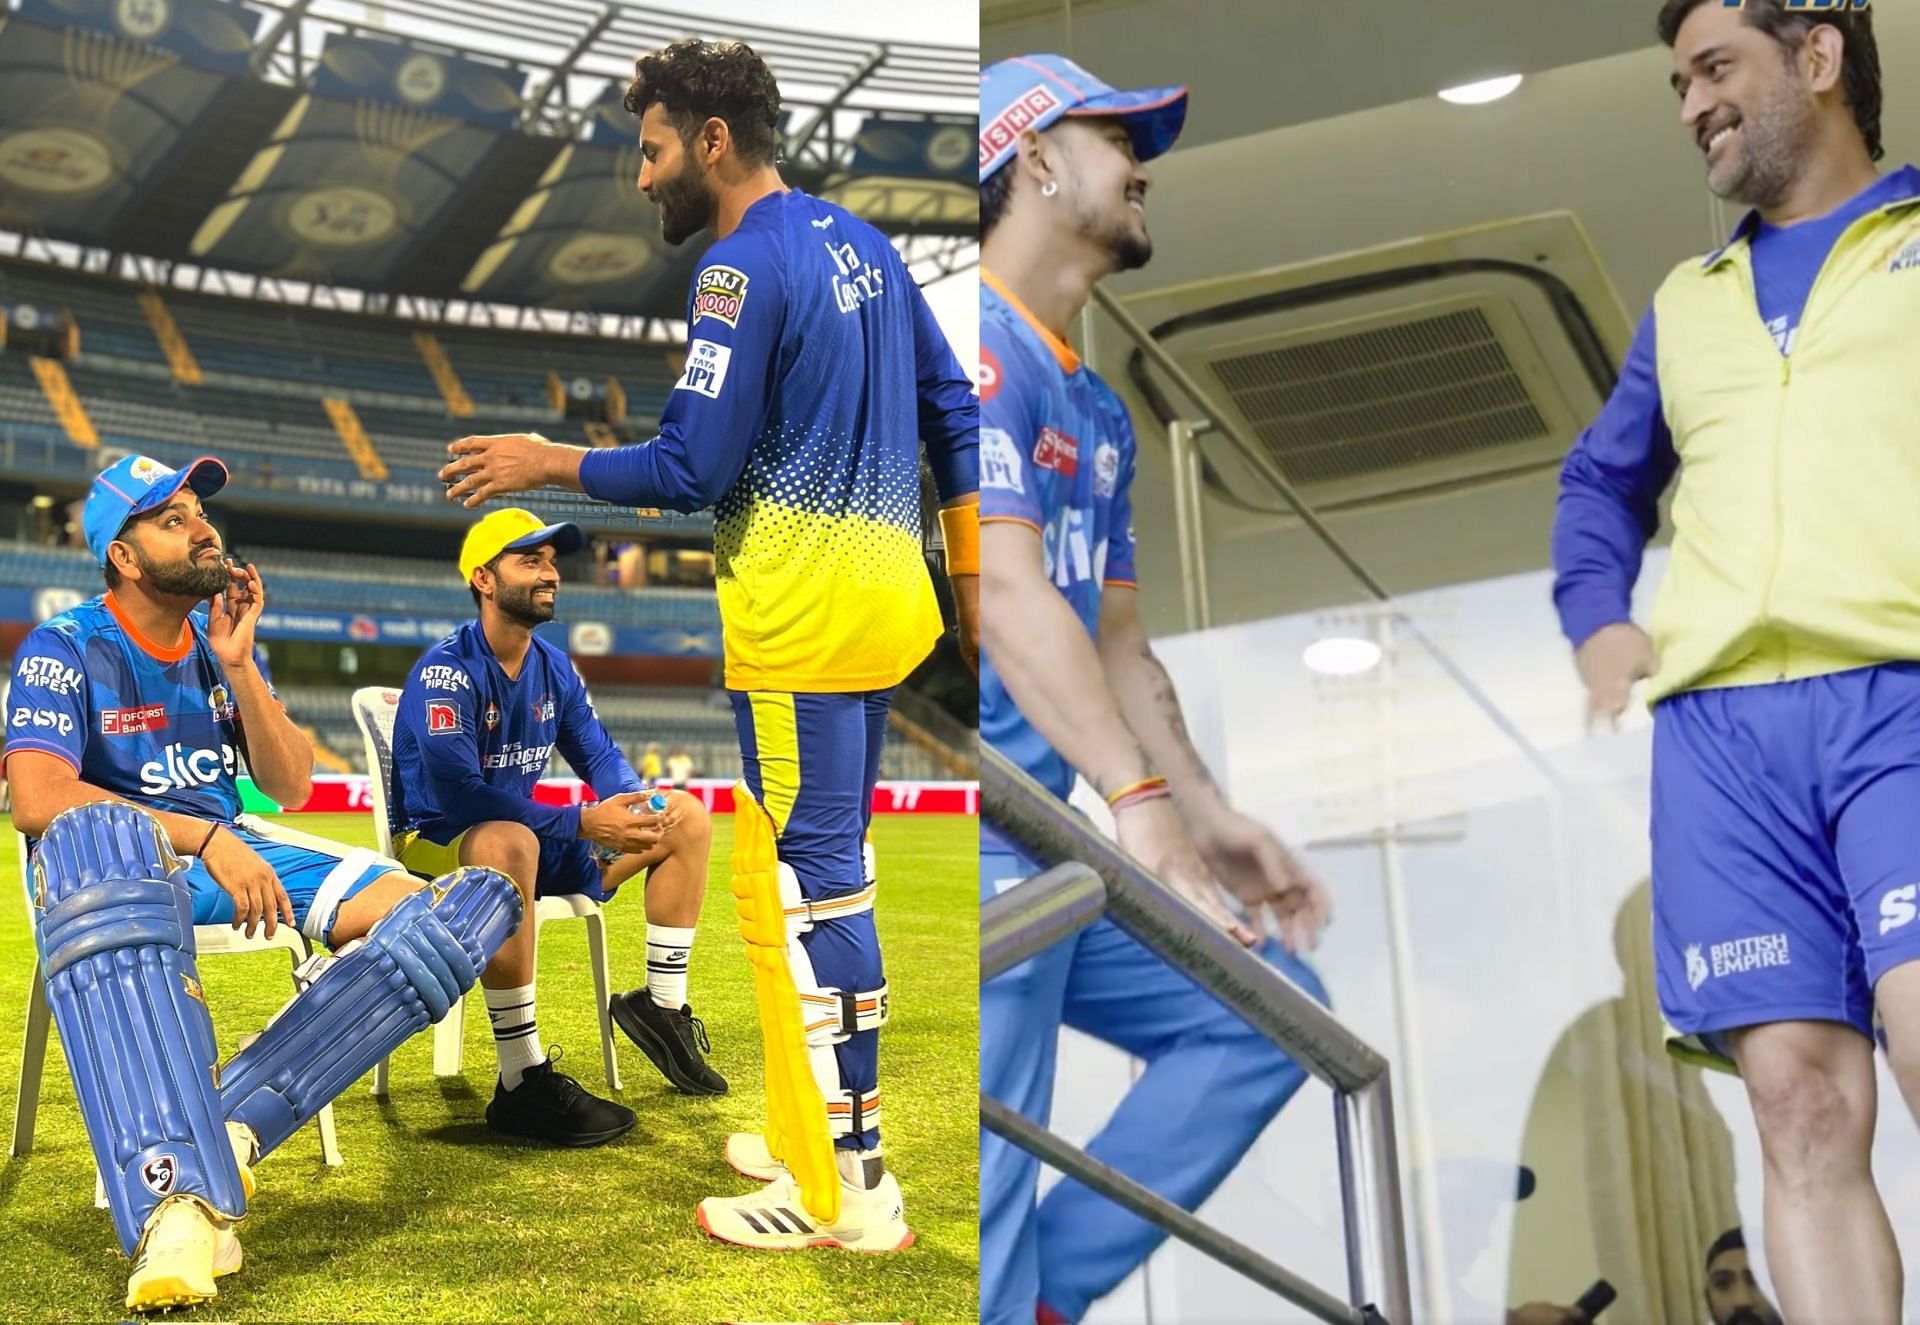 MI and CSK players having fun interactions at the Wankhede Stadium.